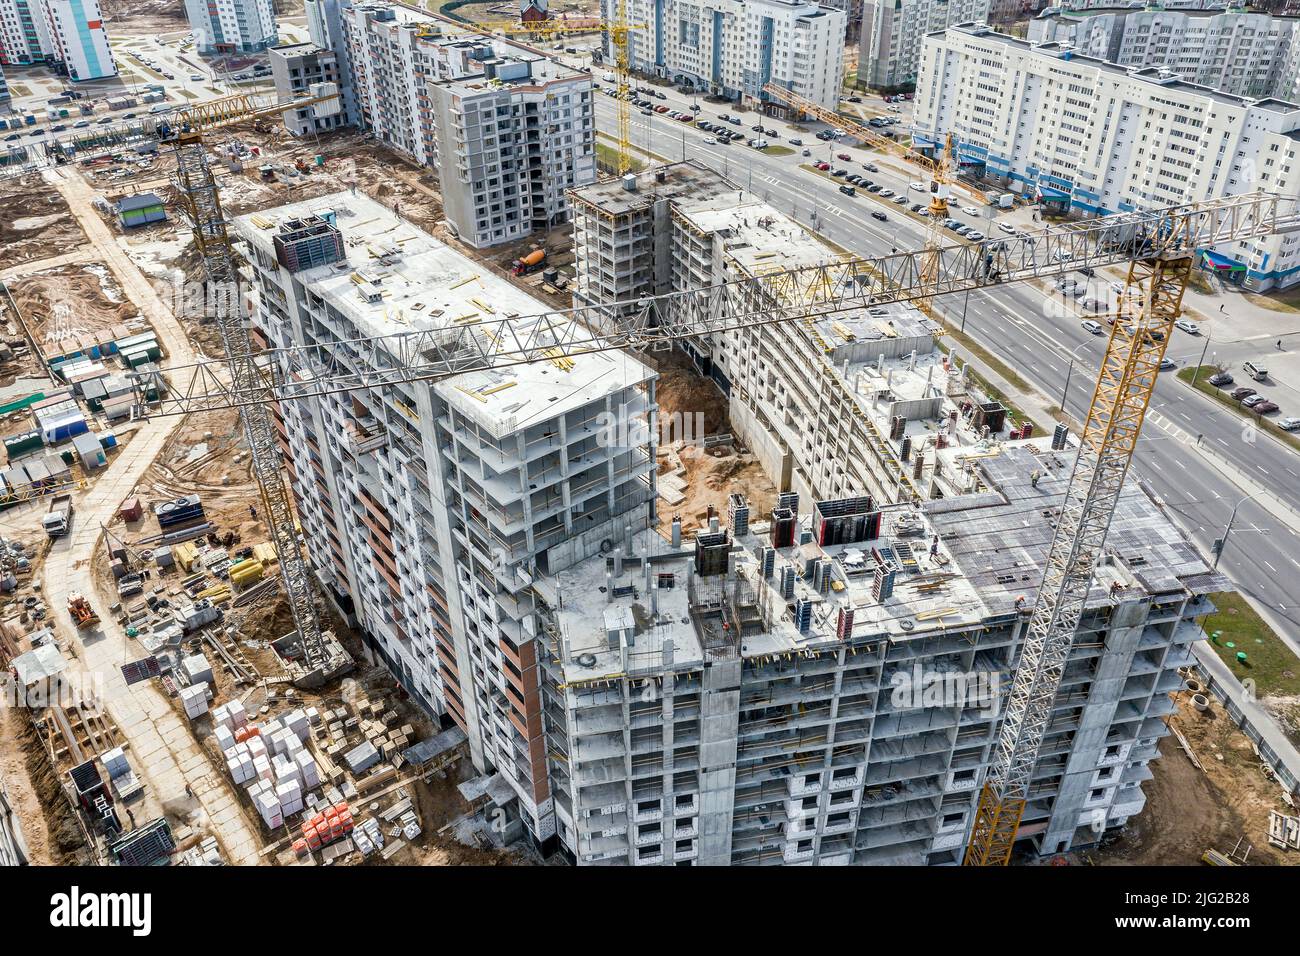 high-rise residential buildings under construction. large construction site, aerial view. Stock Photo